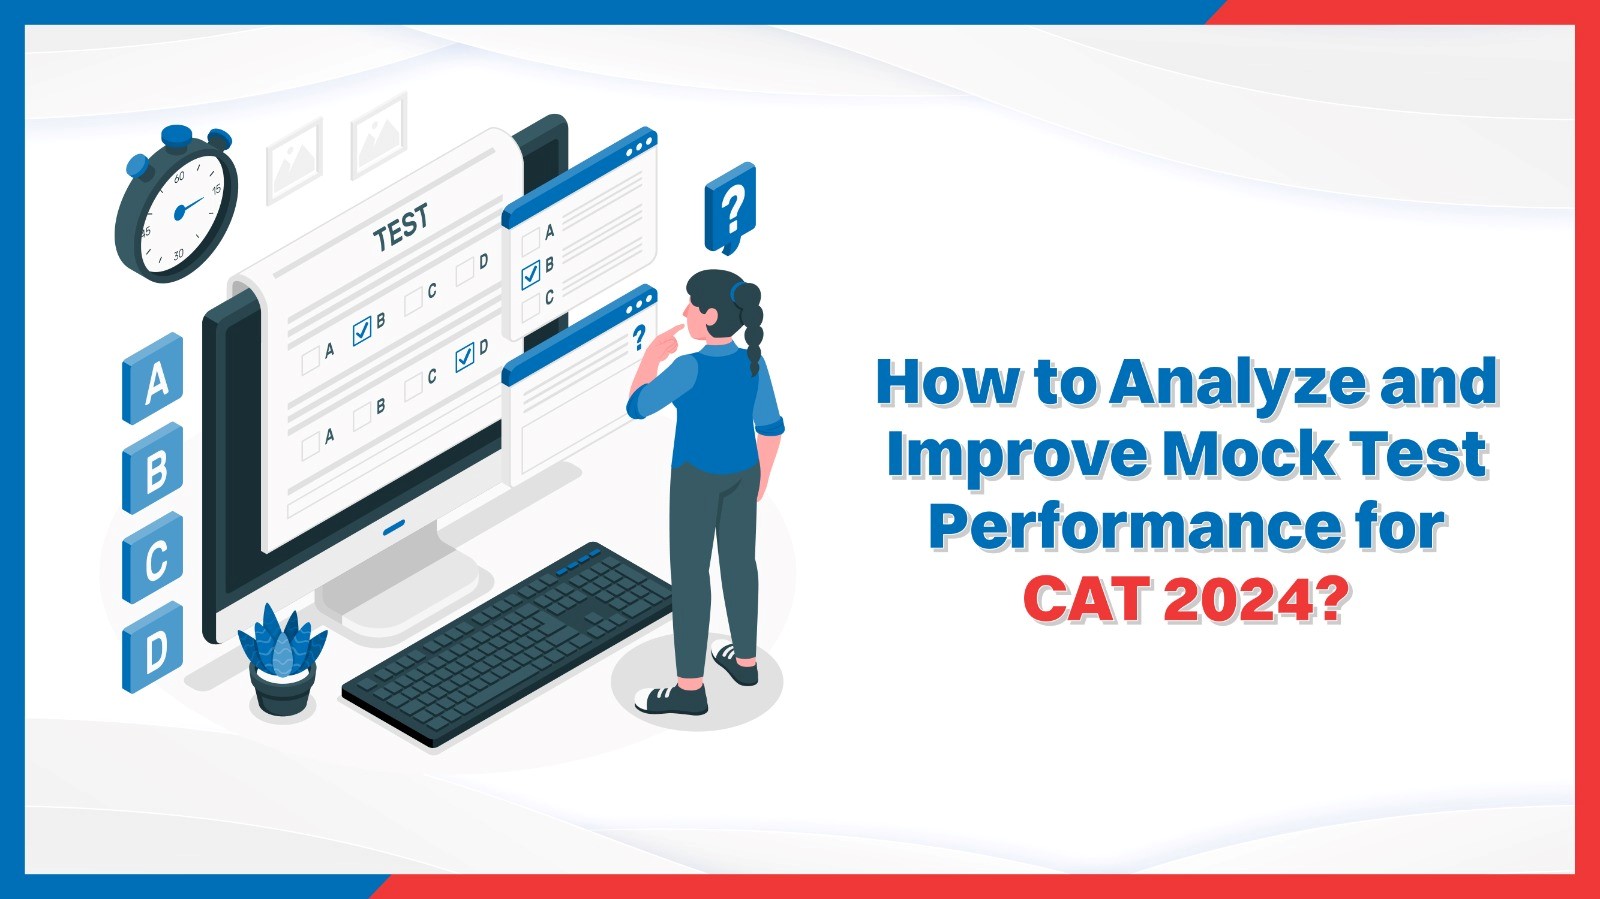 How to Analyze and Improve Mock Test Performance for CAT 2024.jpg